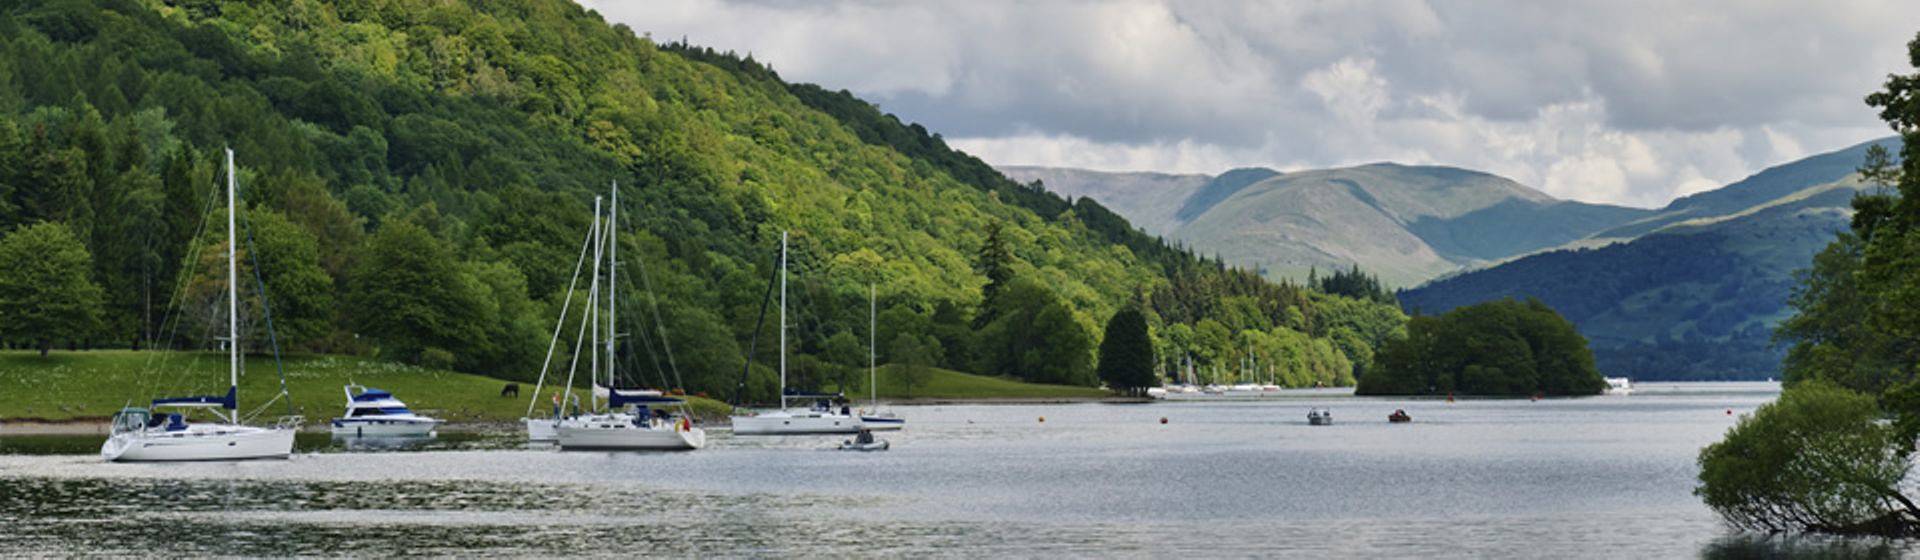 Holidays to Windermere Image